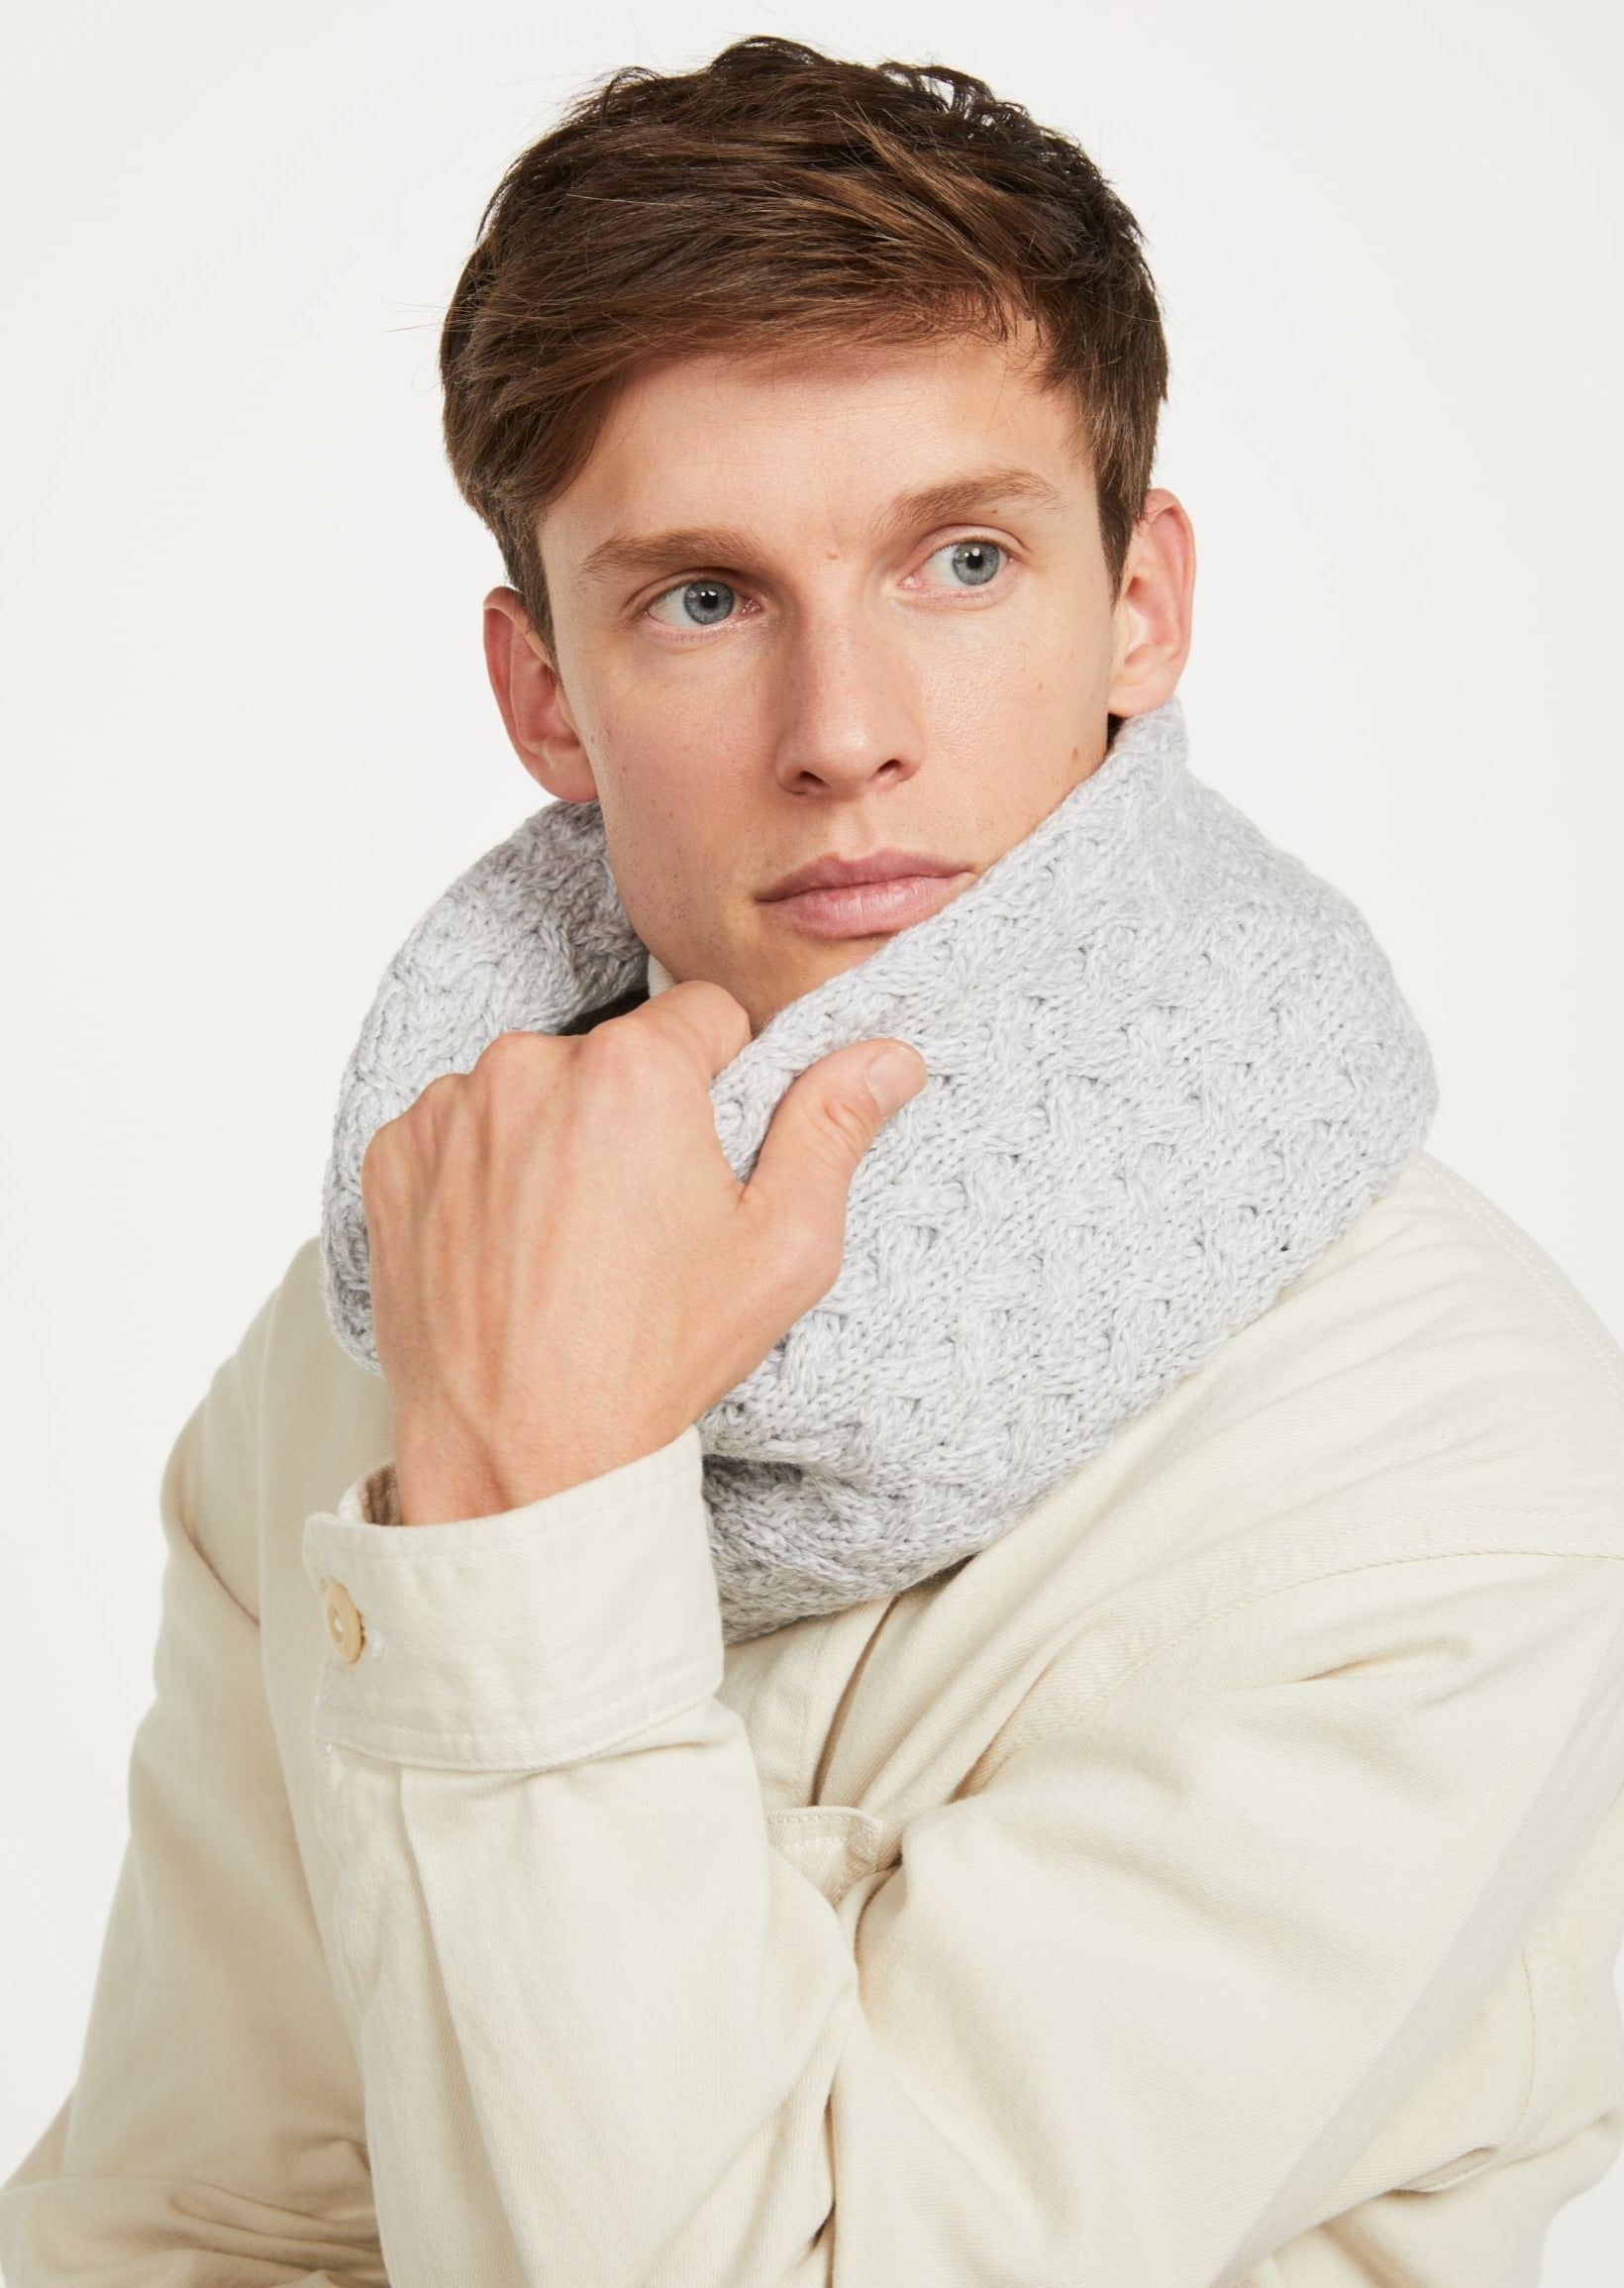 Aran Infinity Cable Scarf - Feather Grey